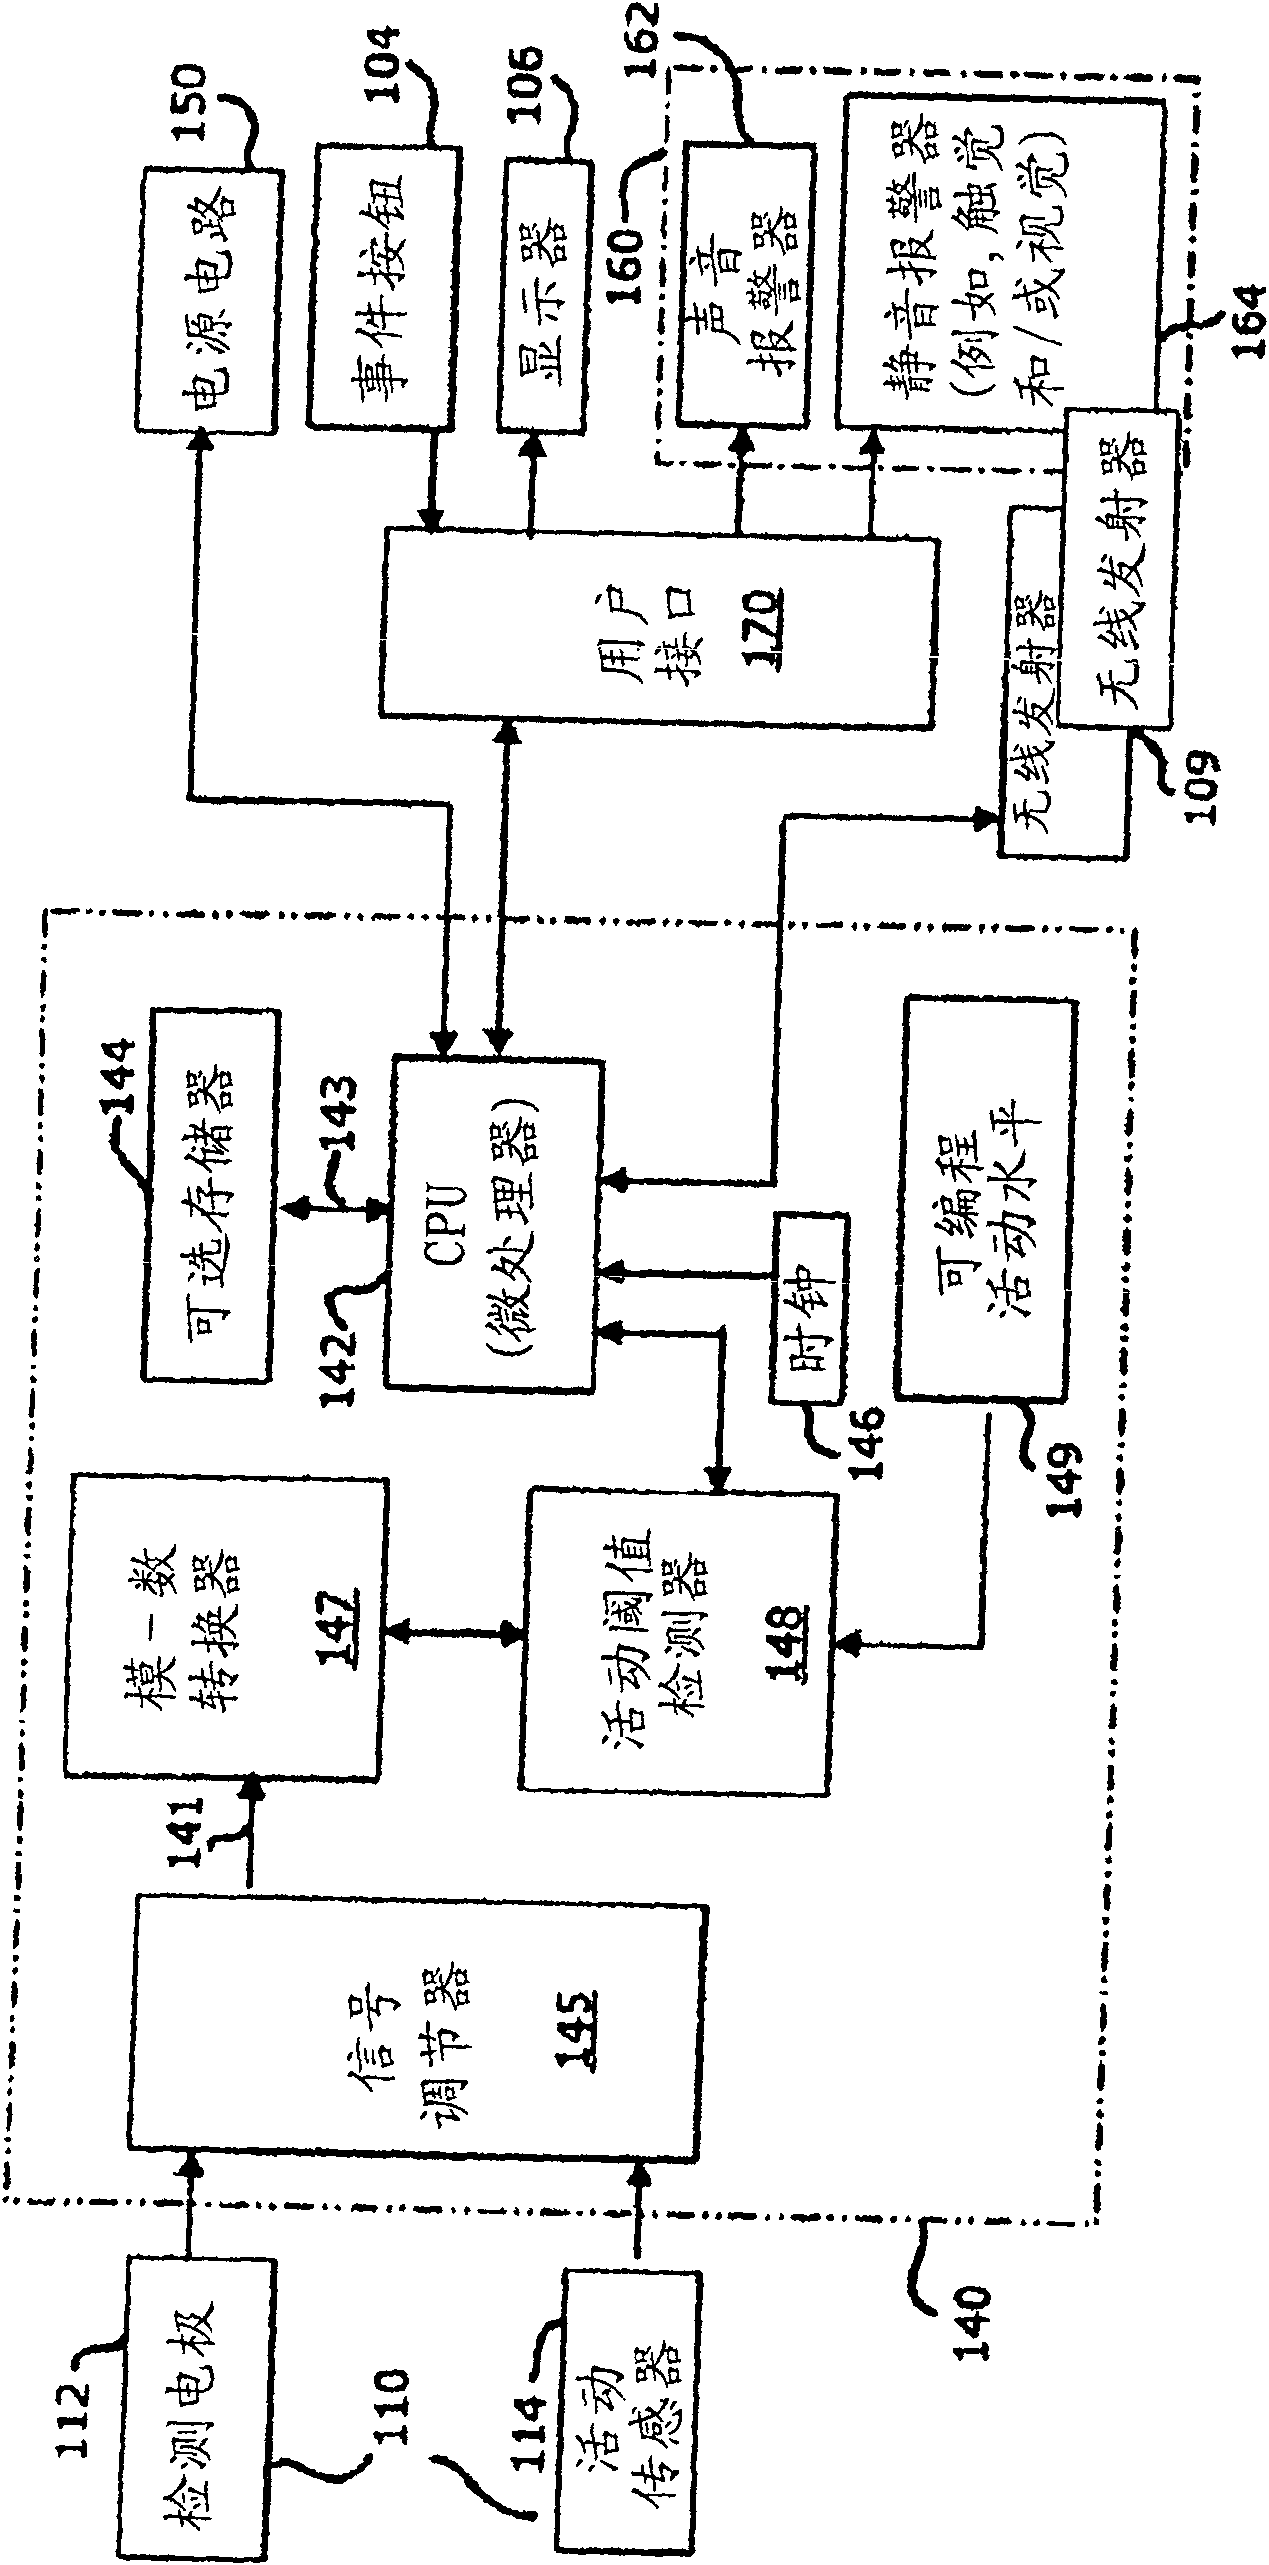 Adaptive physiological monitoring system and methods of using the same